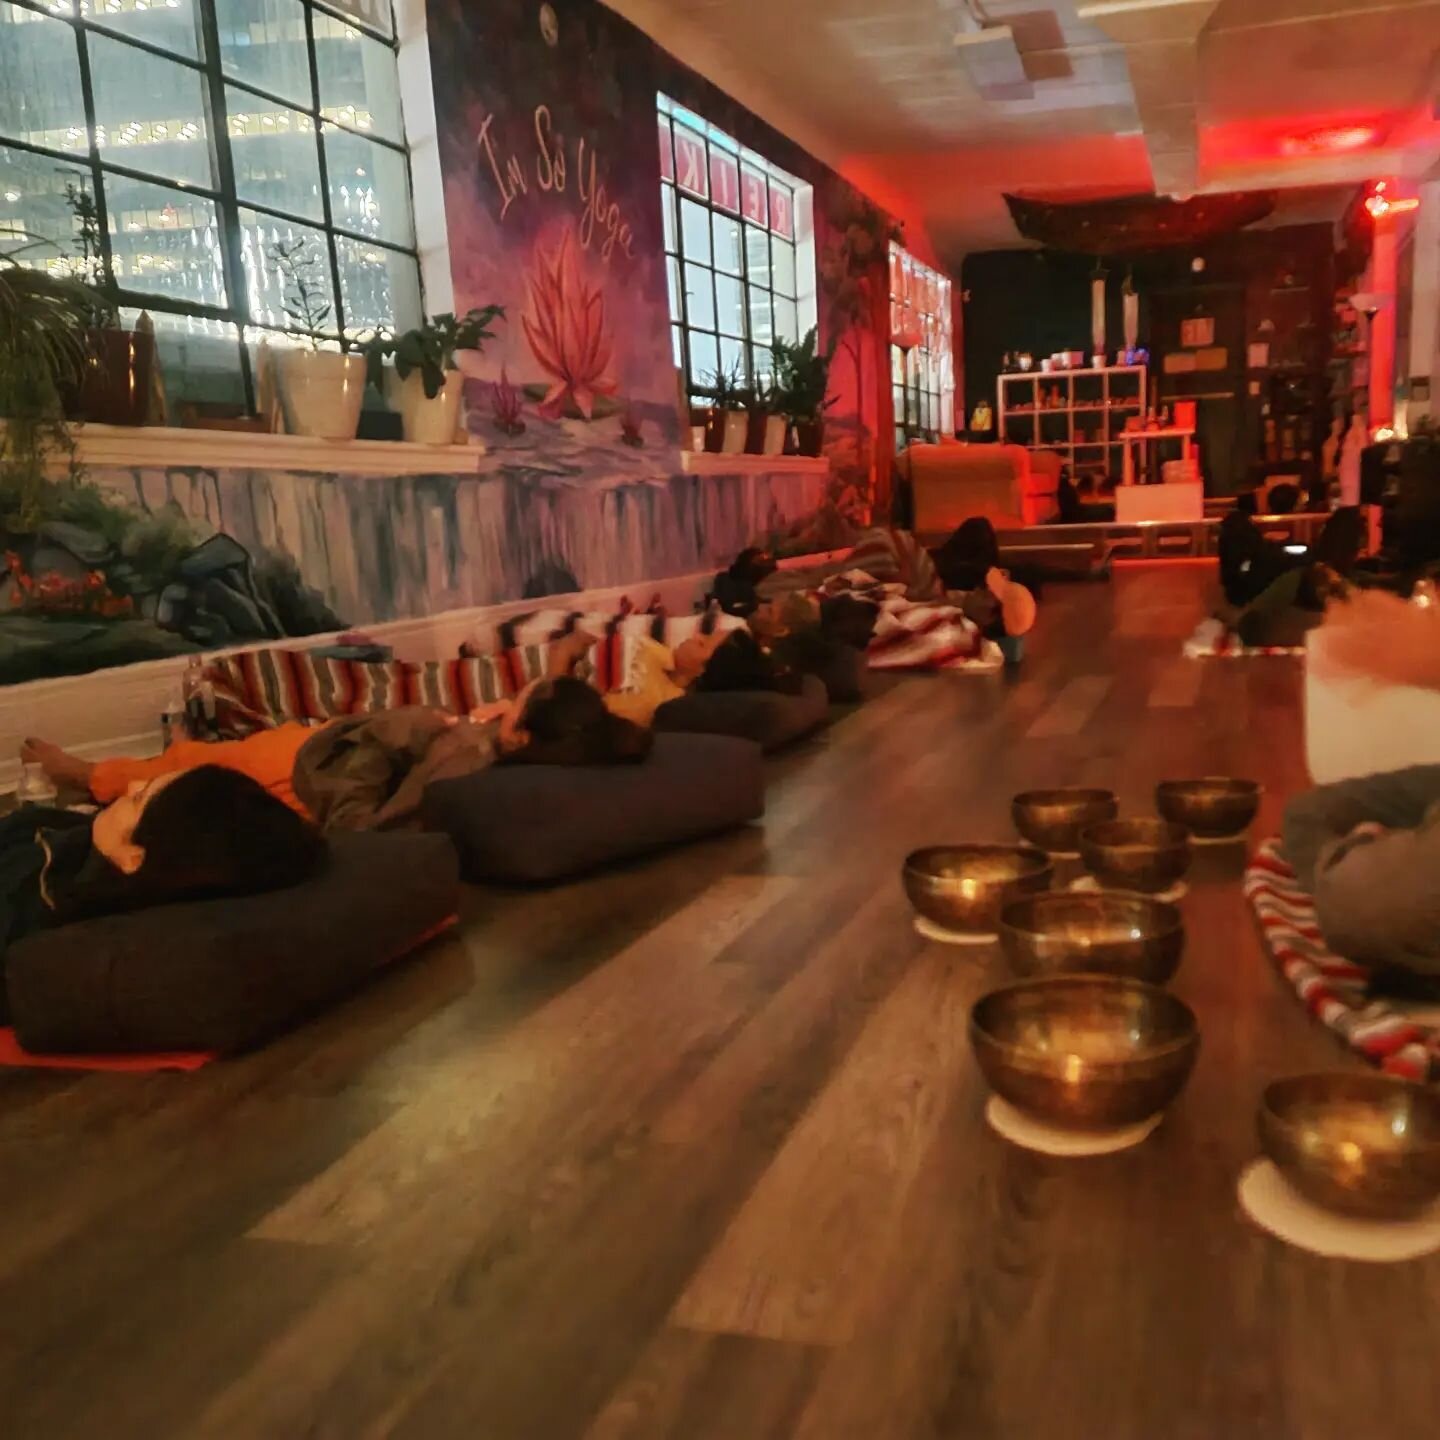 R E L E A S E with the M O O N @imsoyoganewark thx you to those who came out this night was amazing. 

Friday March 18th from 8pm until 10pm 

Navigated by @soleillalune312022
Sound Bowls by @ninjanickels
Bansuri Flute @beats_n_eats_by_navin

Pay Via